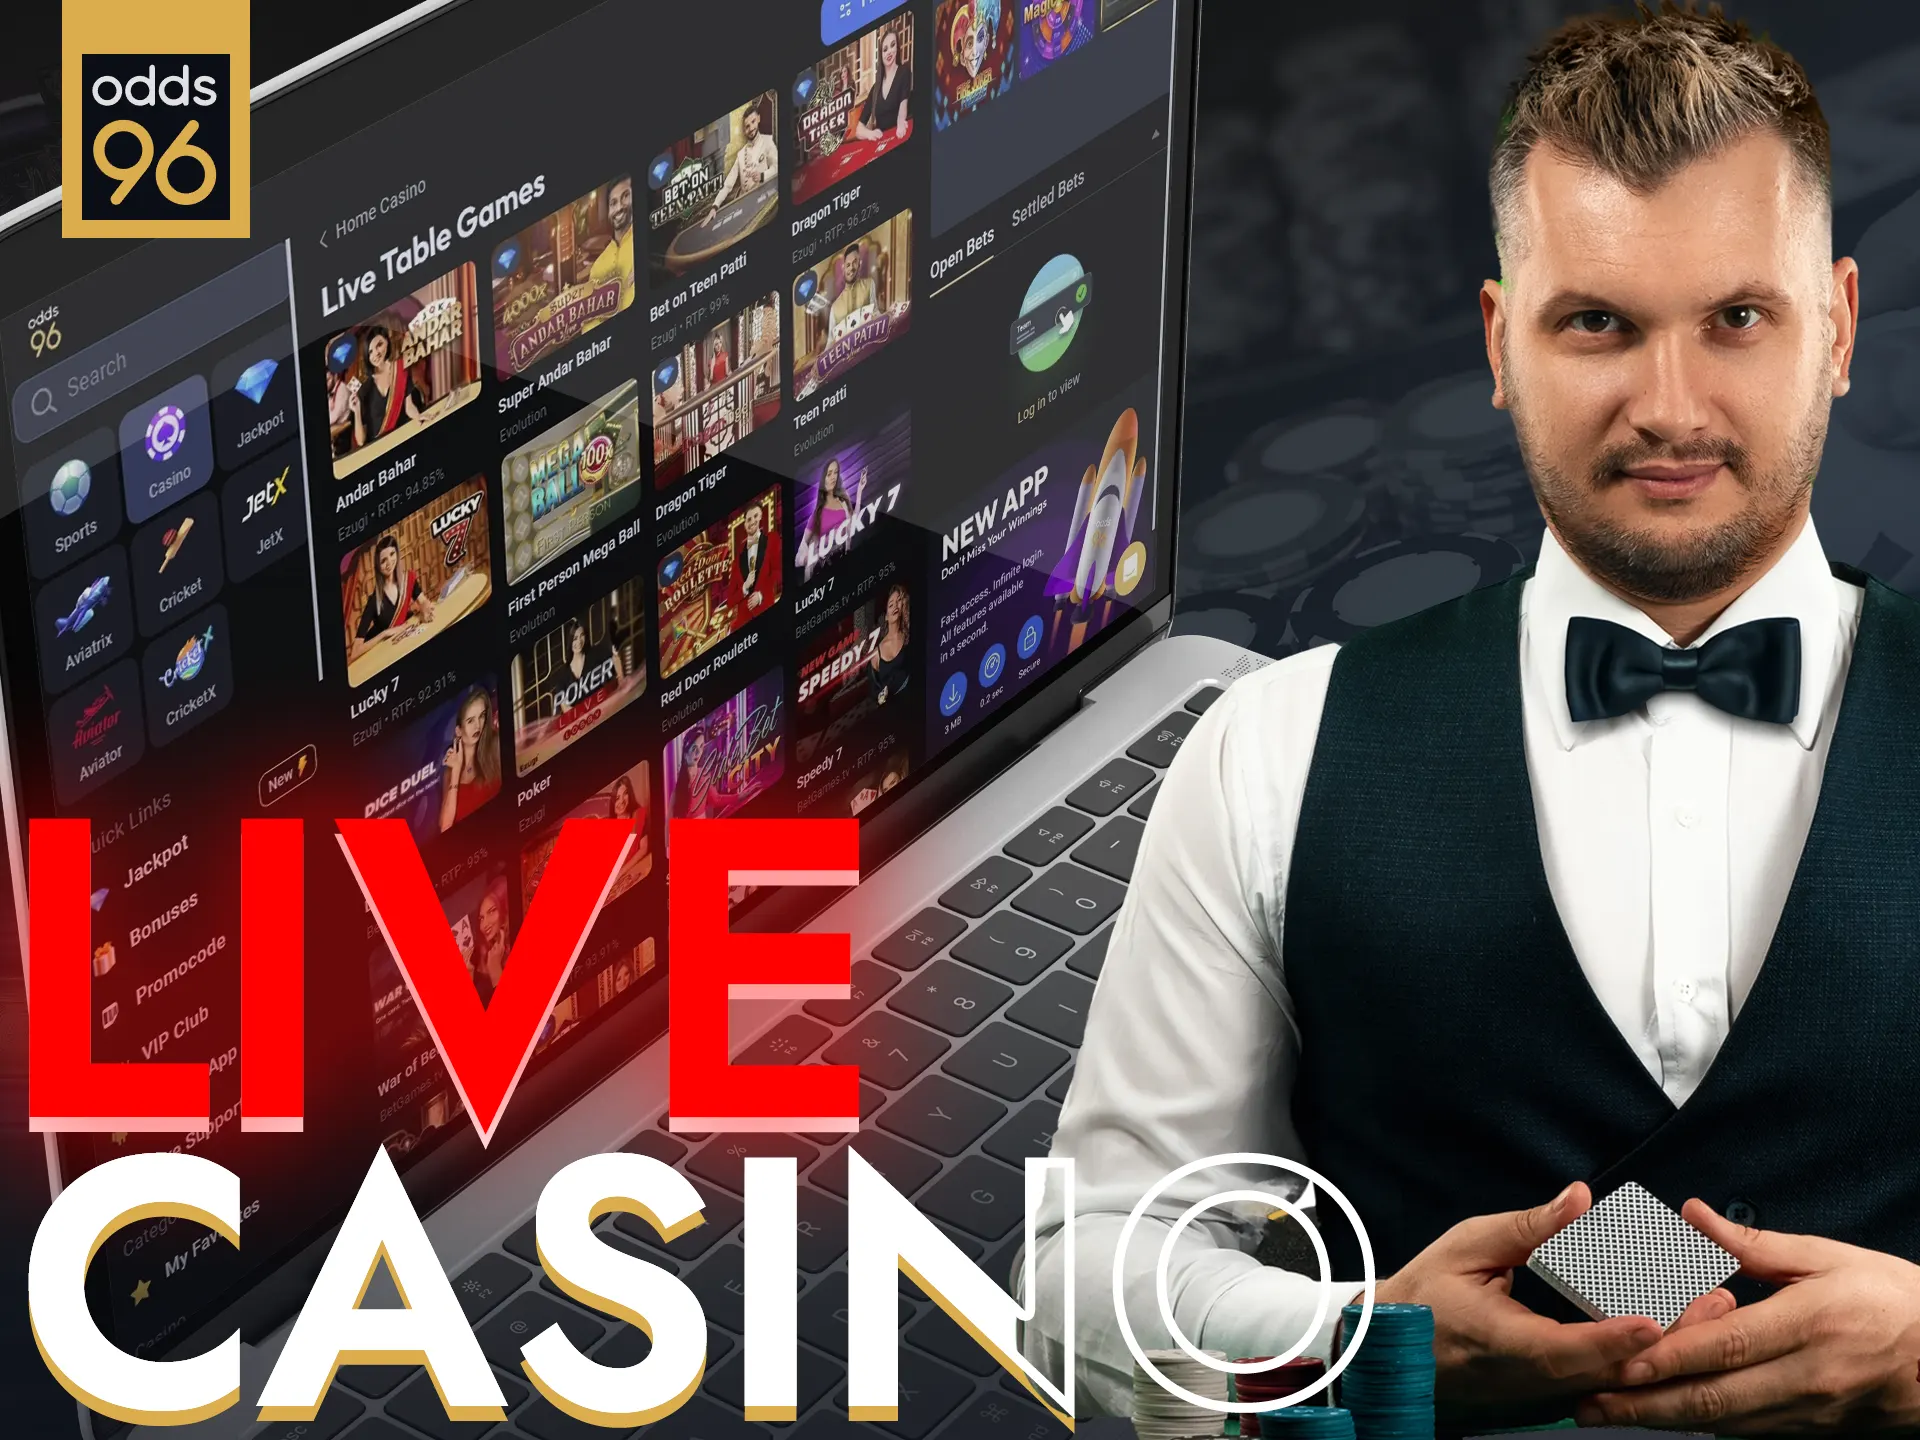 Odds96 features interactive live casino games with real dealers.